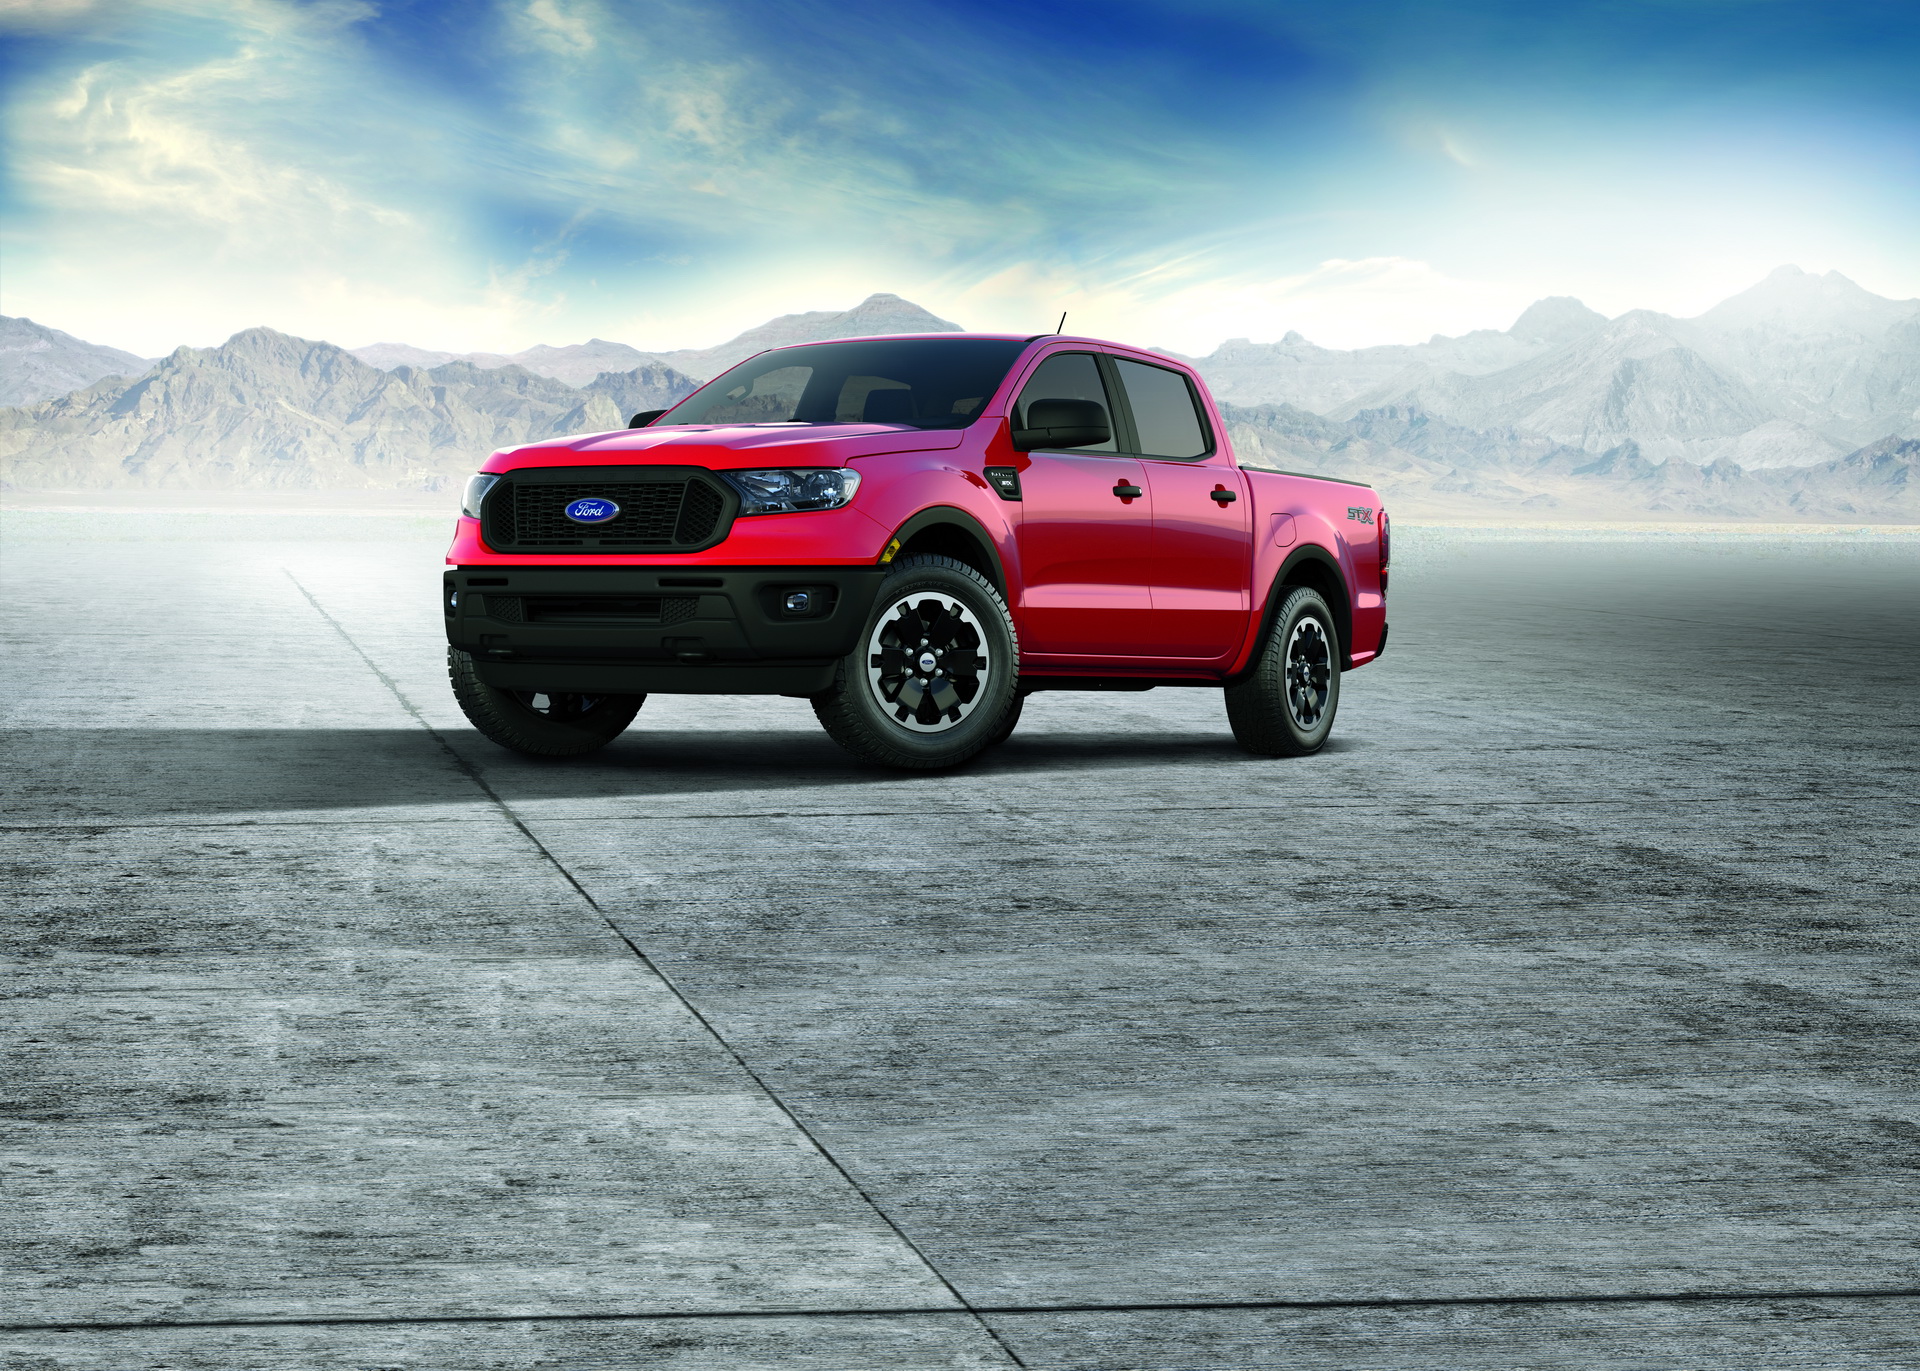 2021-ford-ranger-stx-special-edition-package-1.jpg